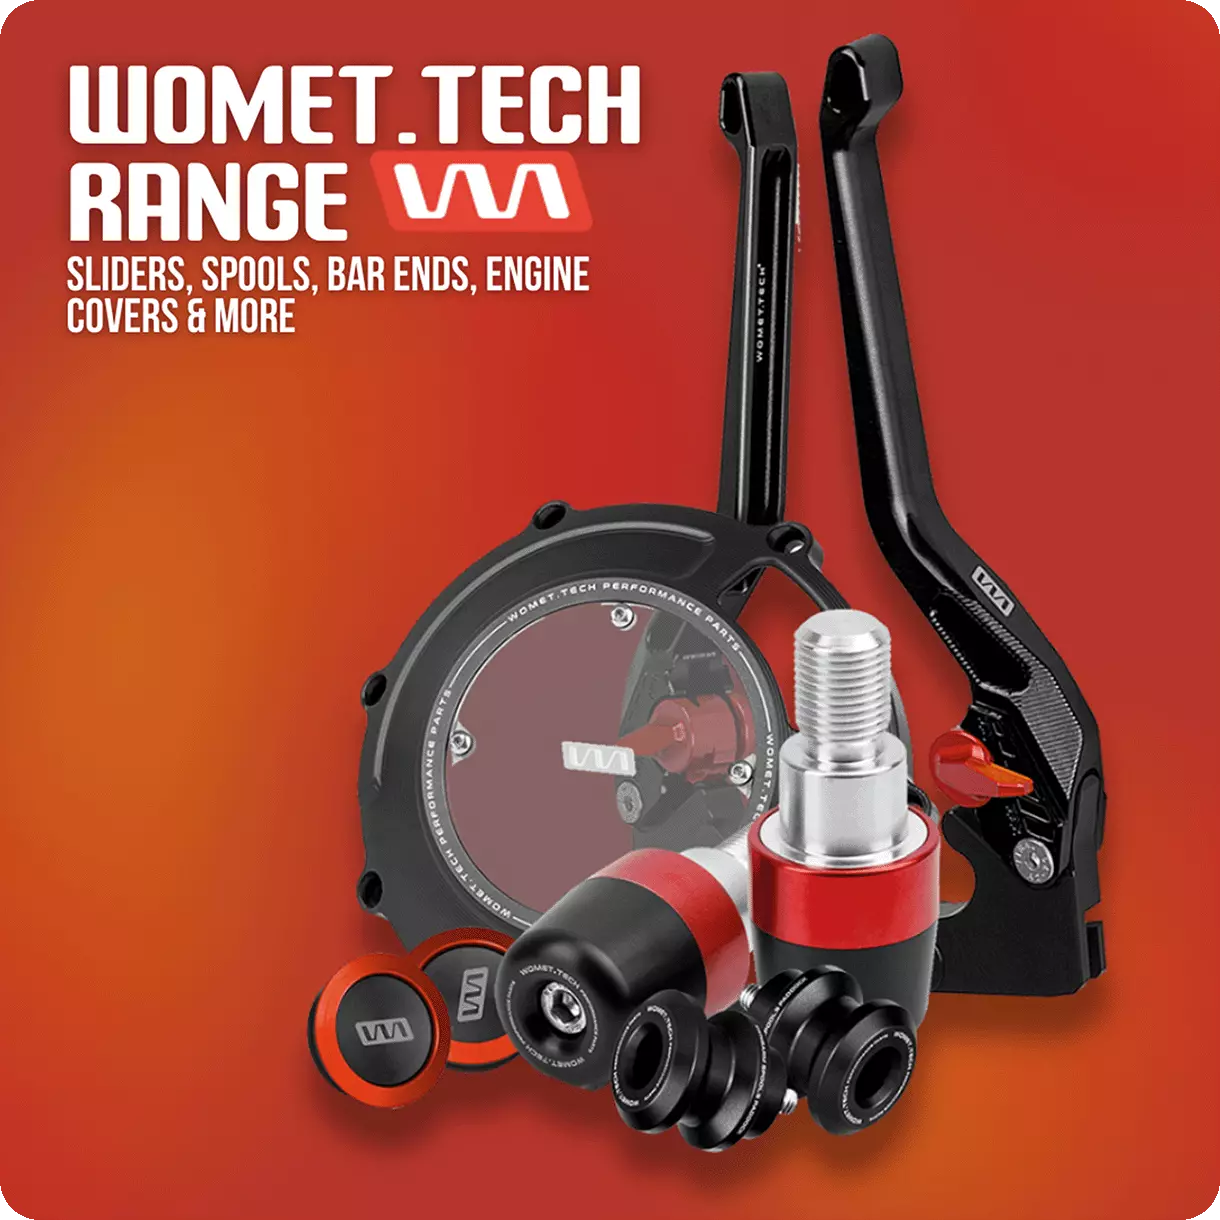 Womet-Tech Australia - Bar ends, Levers, Crash Pads and more